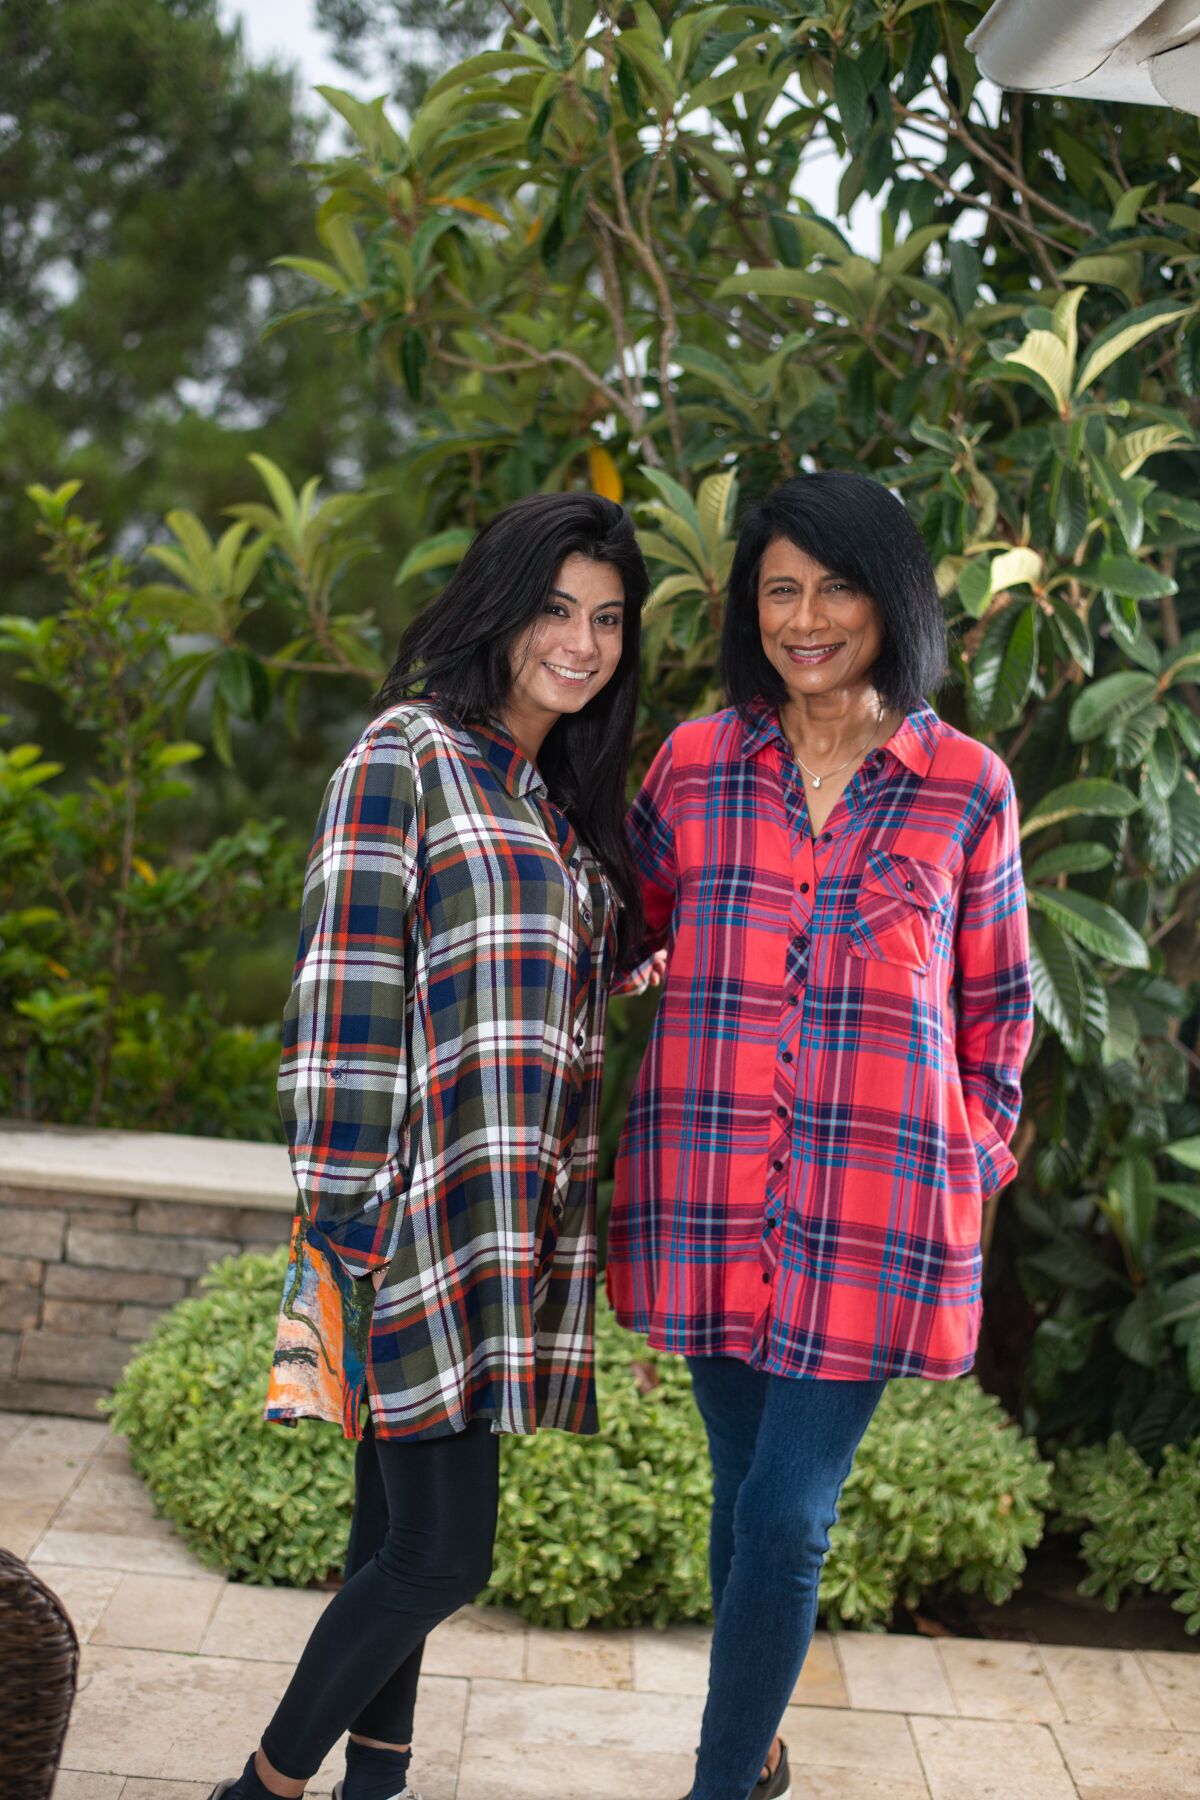 Mother-daughter team: Alka and Aishya in Tolani blankets.